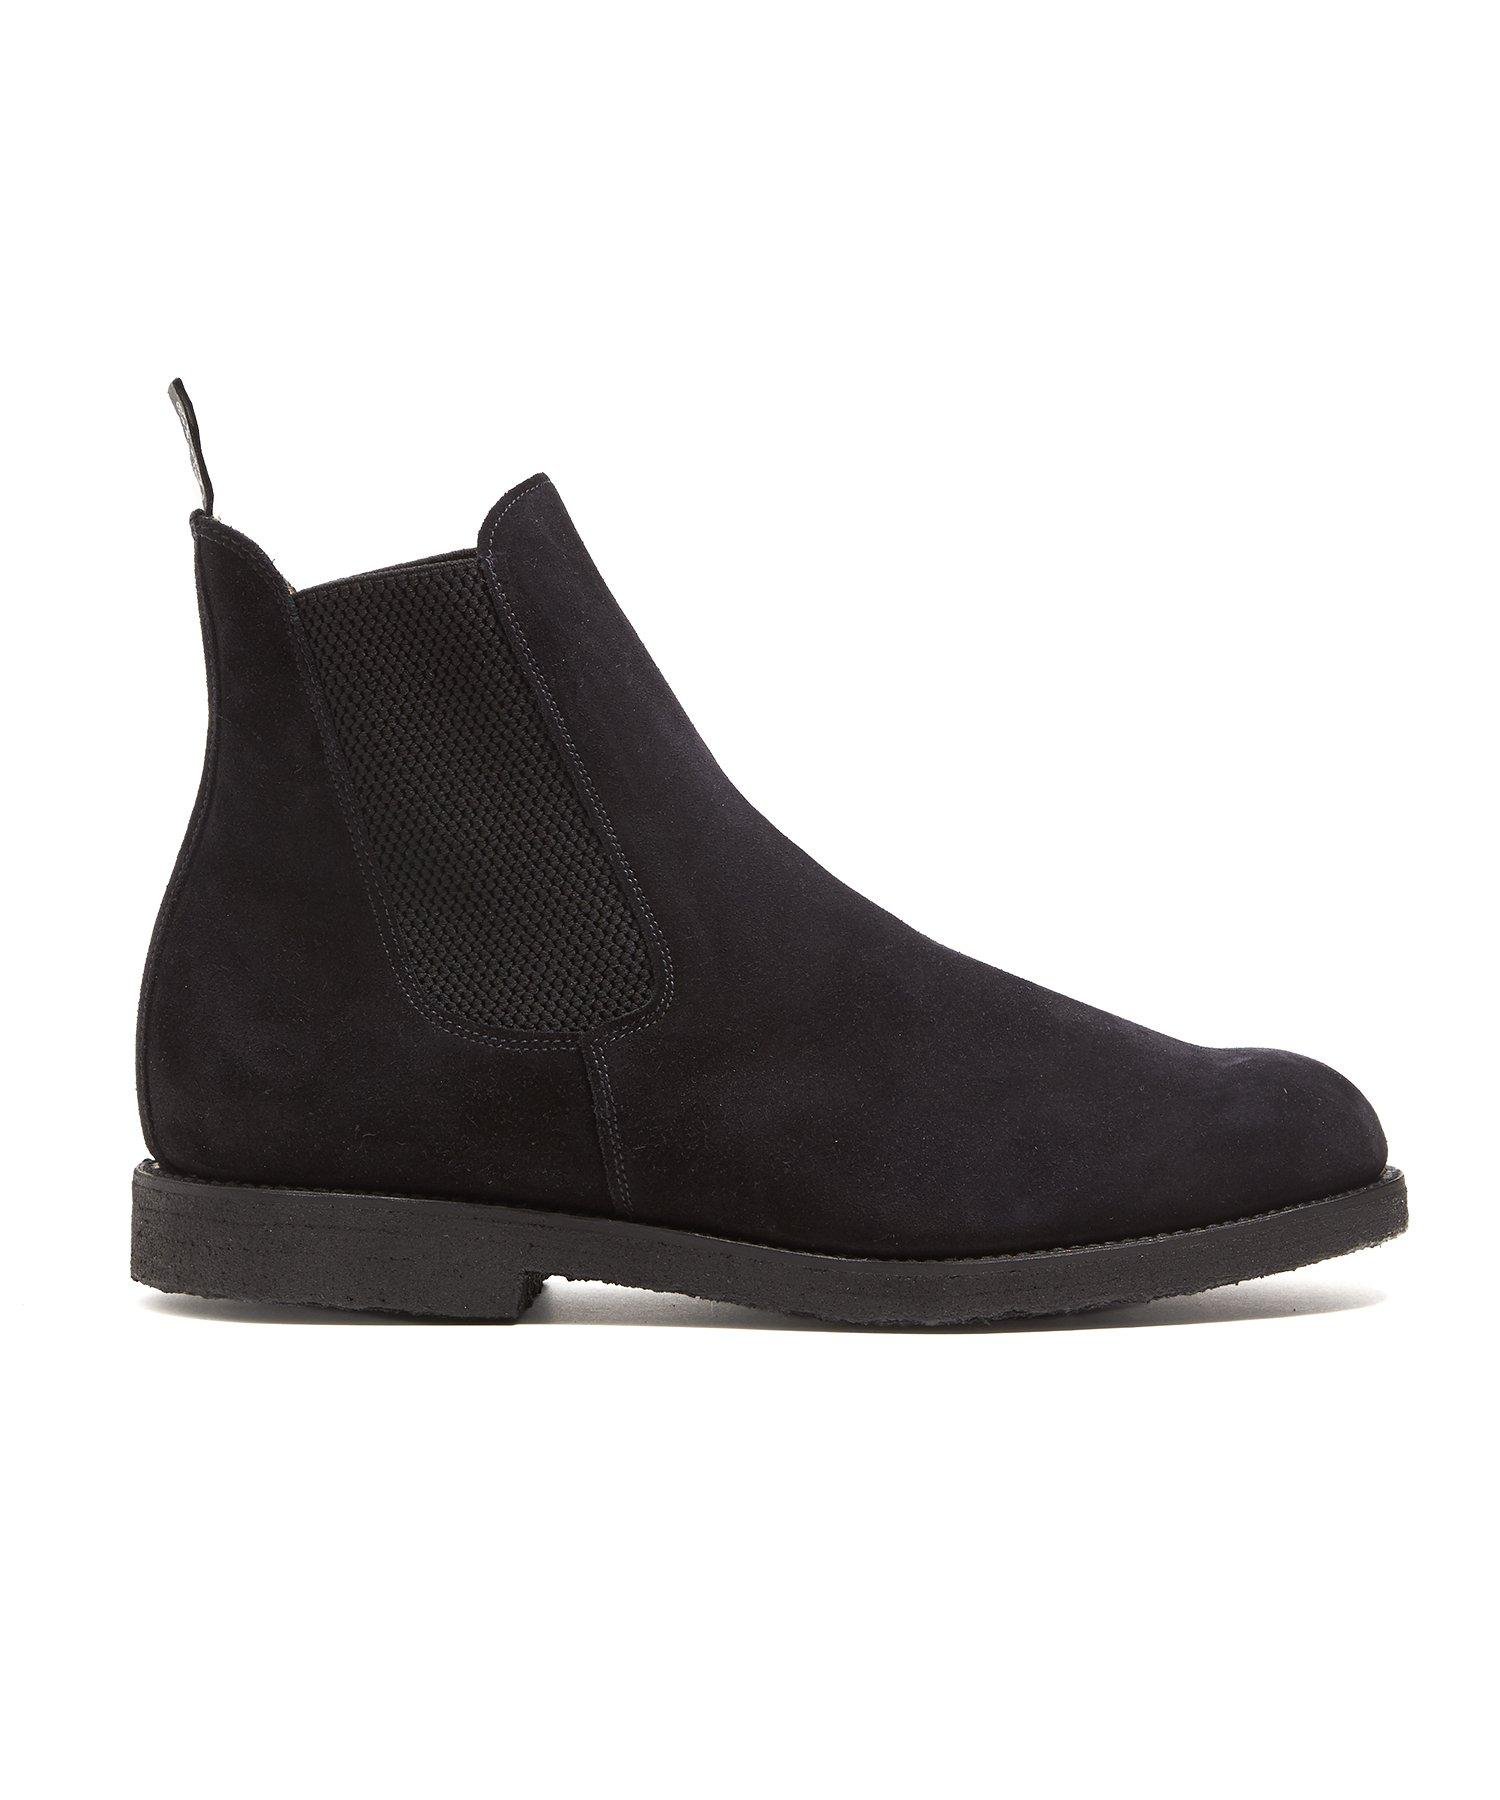 Sanders Chelsea Boots In Black Suede for Men - Save 50% - Lyst